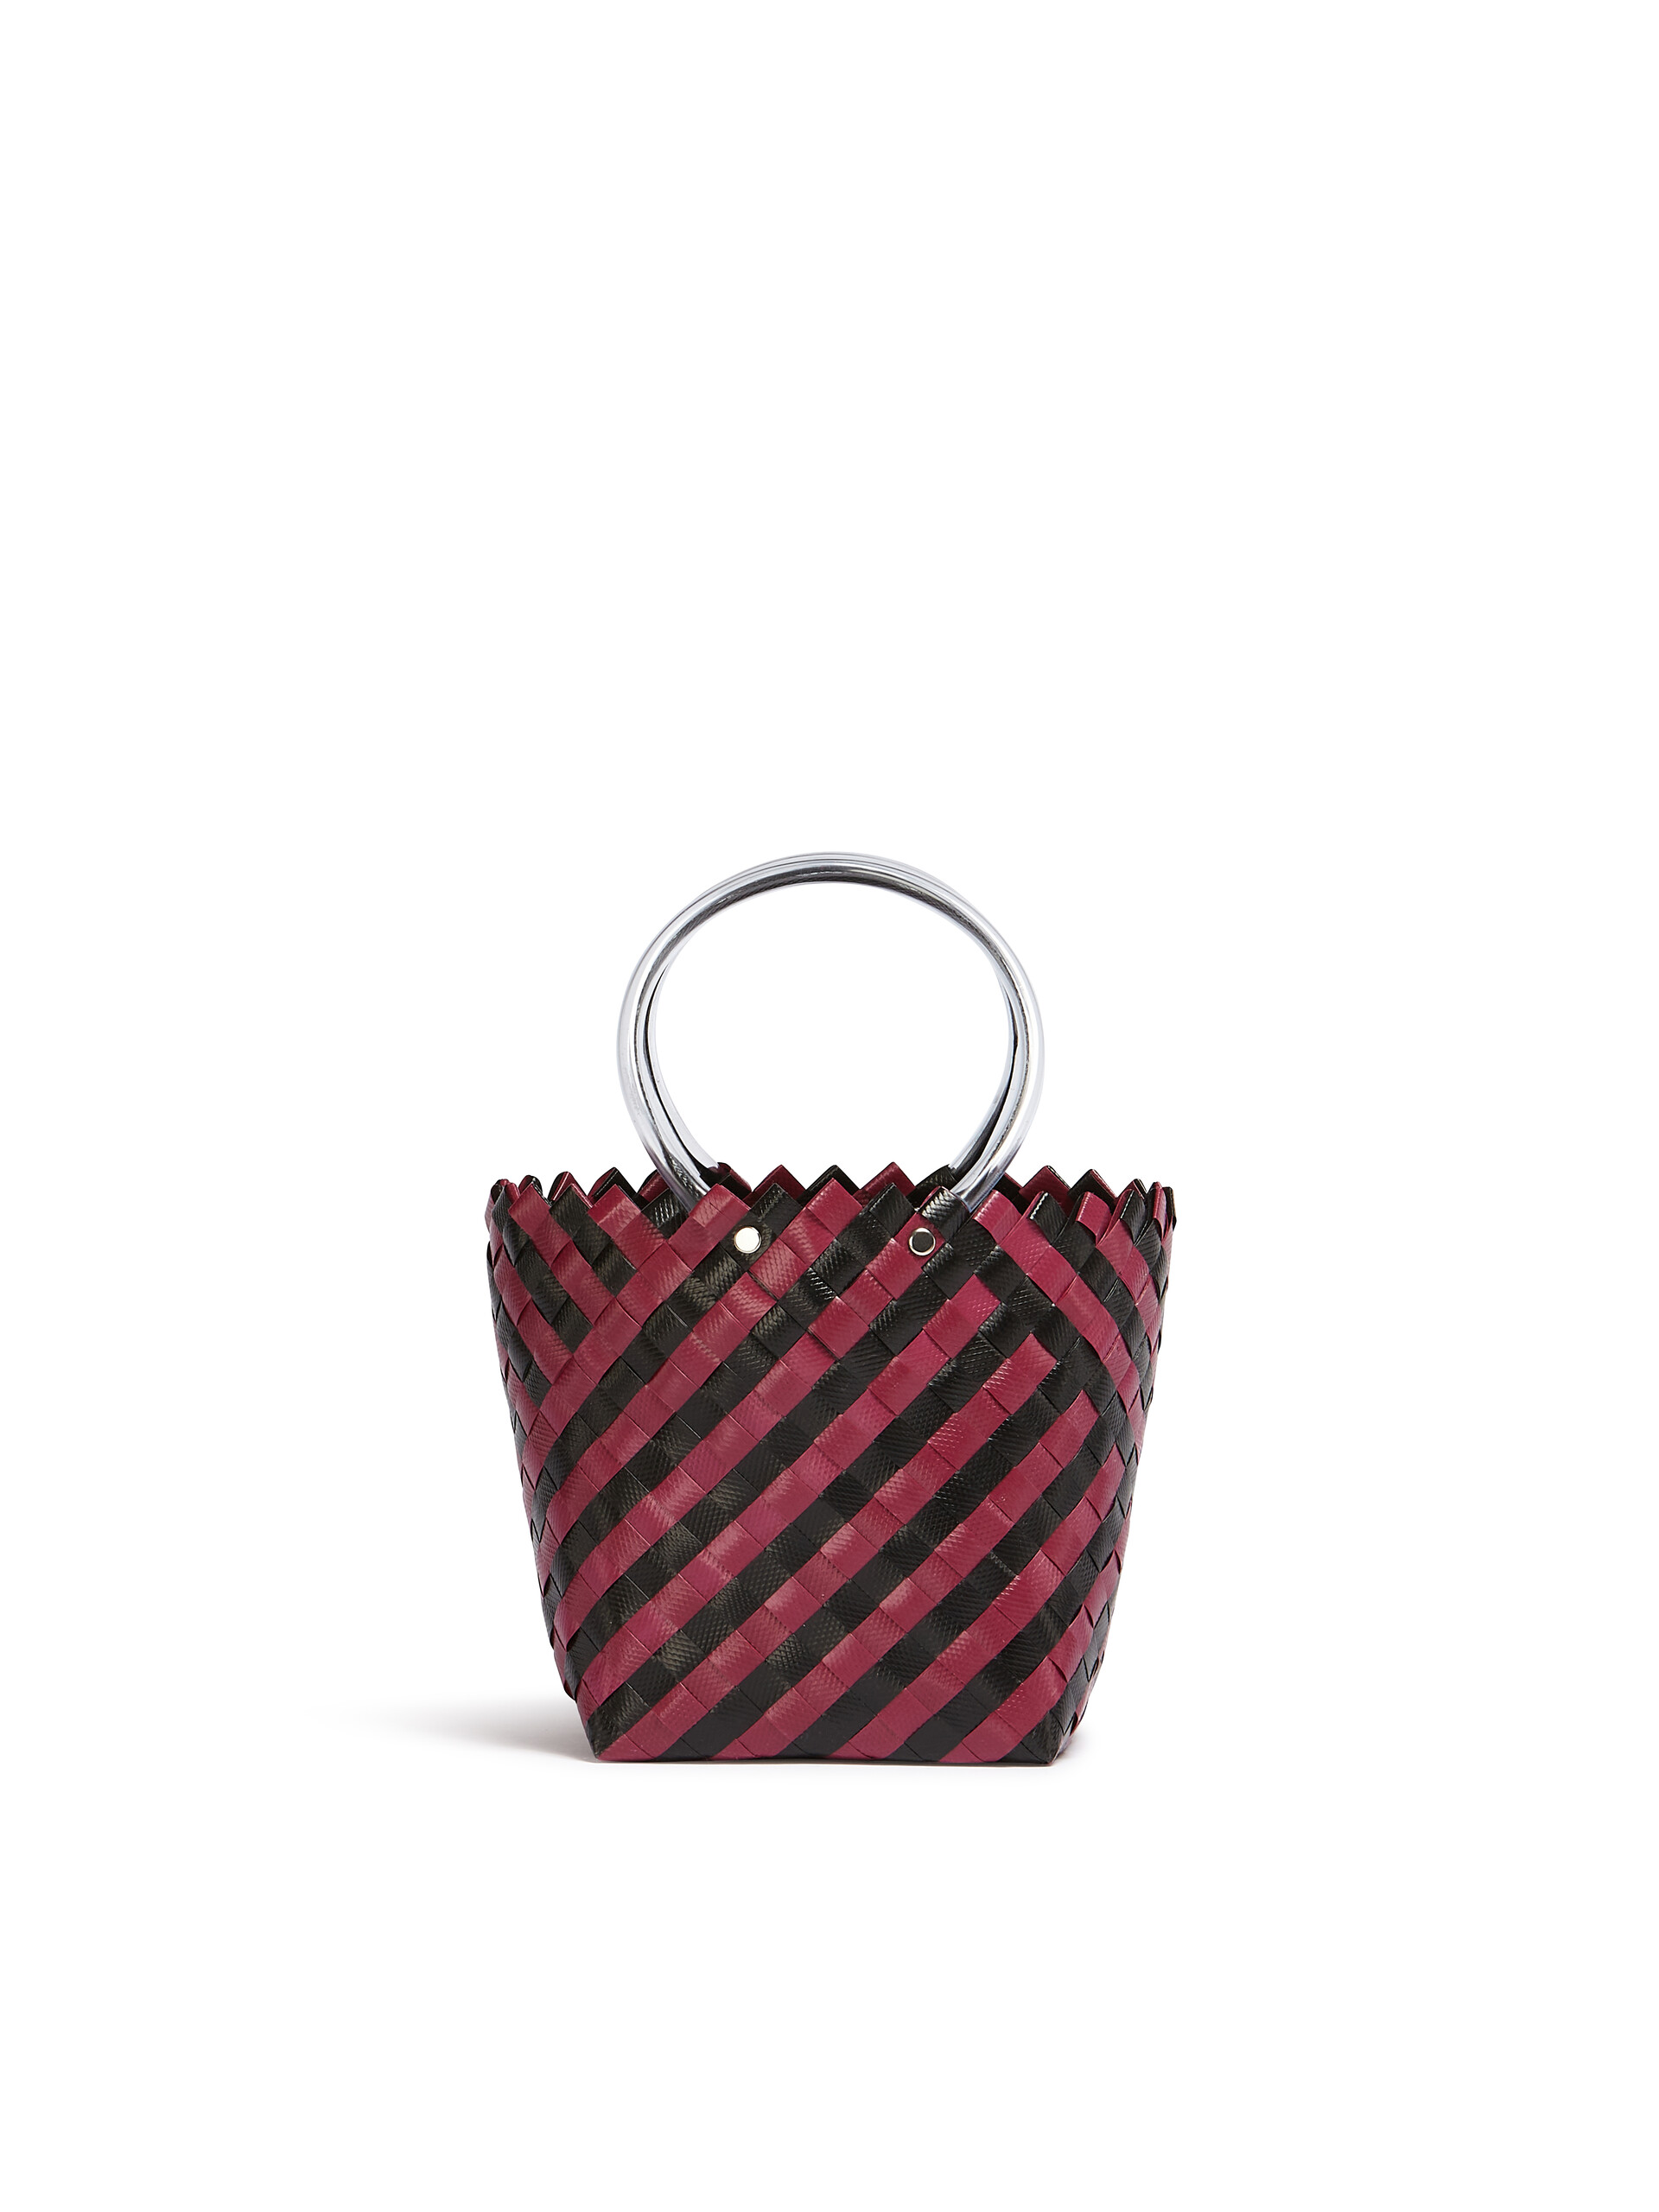 MARNI MARKET bag in black and burgundy woven material - Bags - Image 3